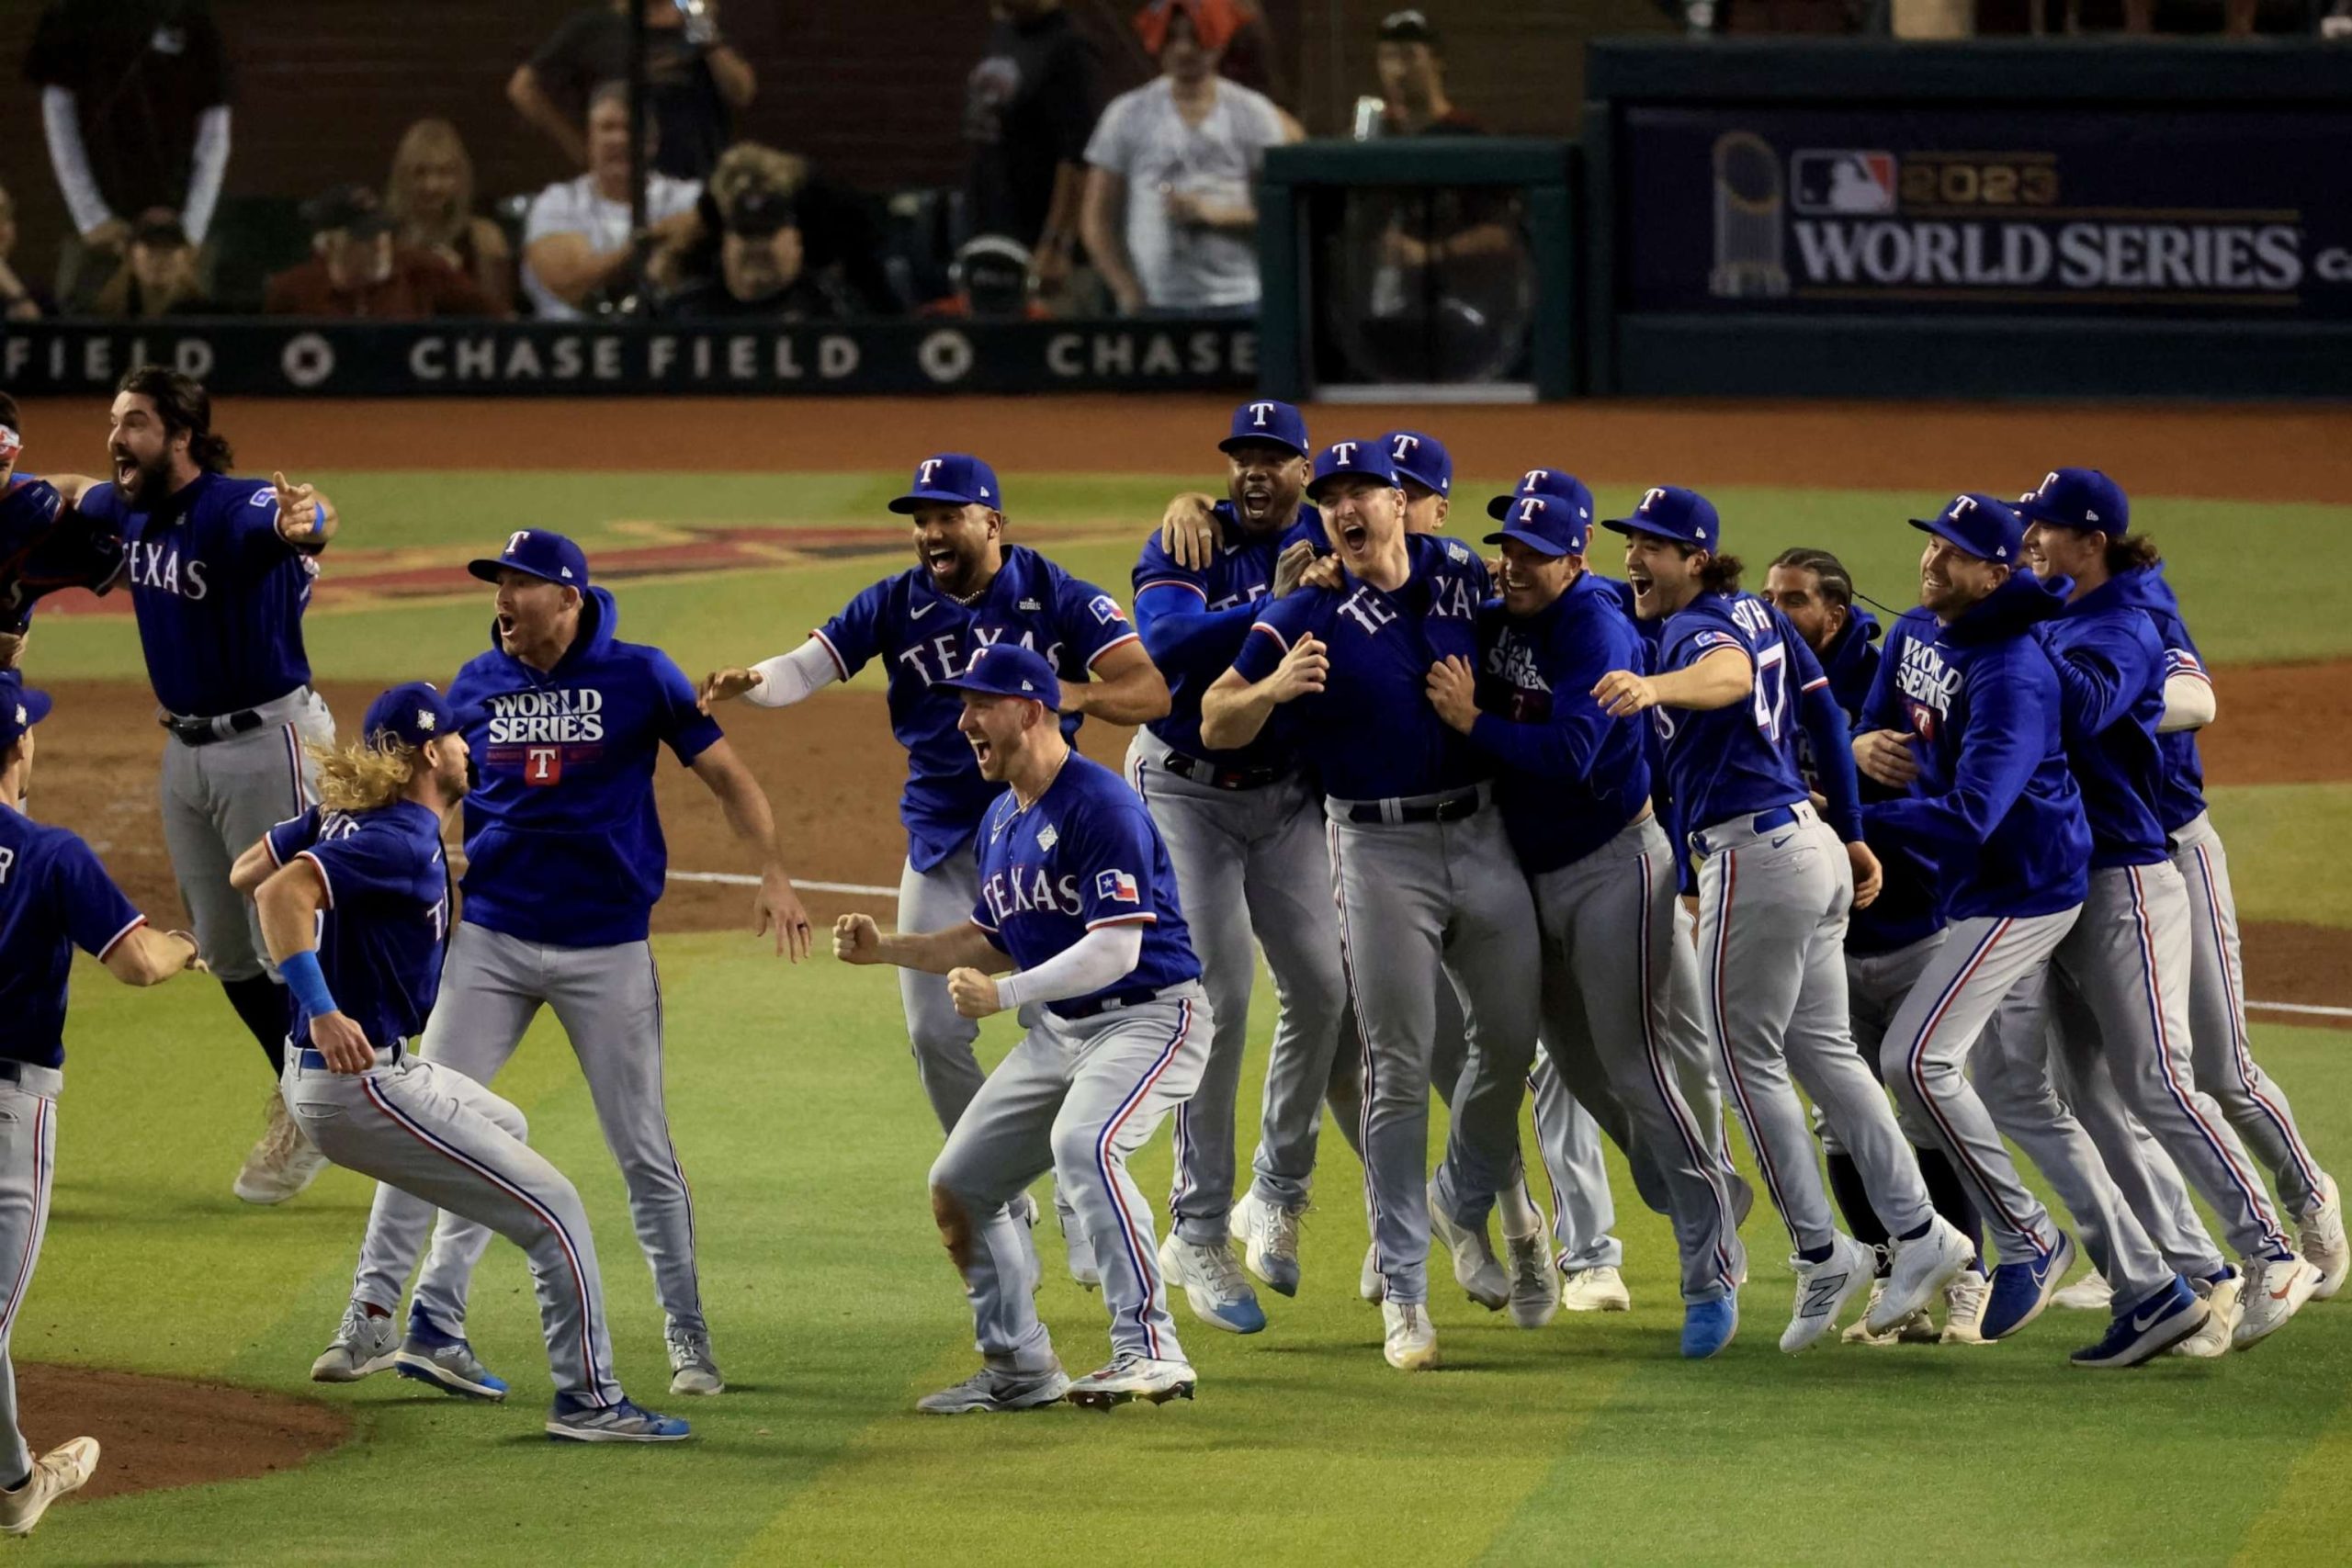 Texas Rangers Make History by Winning Their First World Series Title